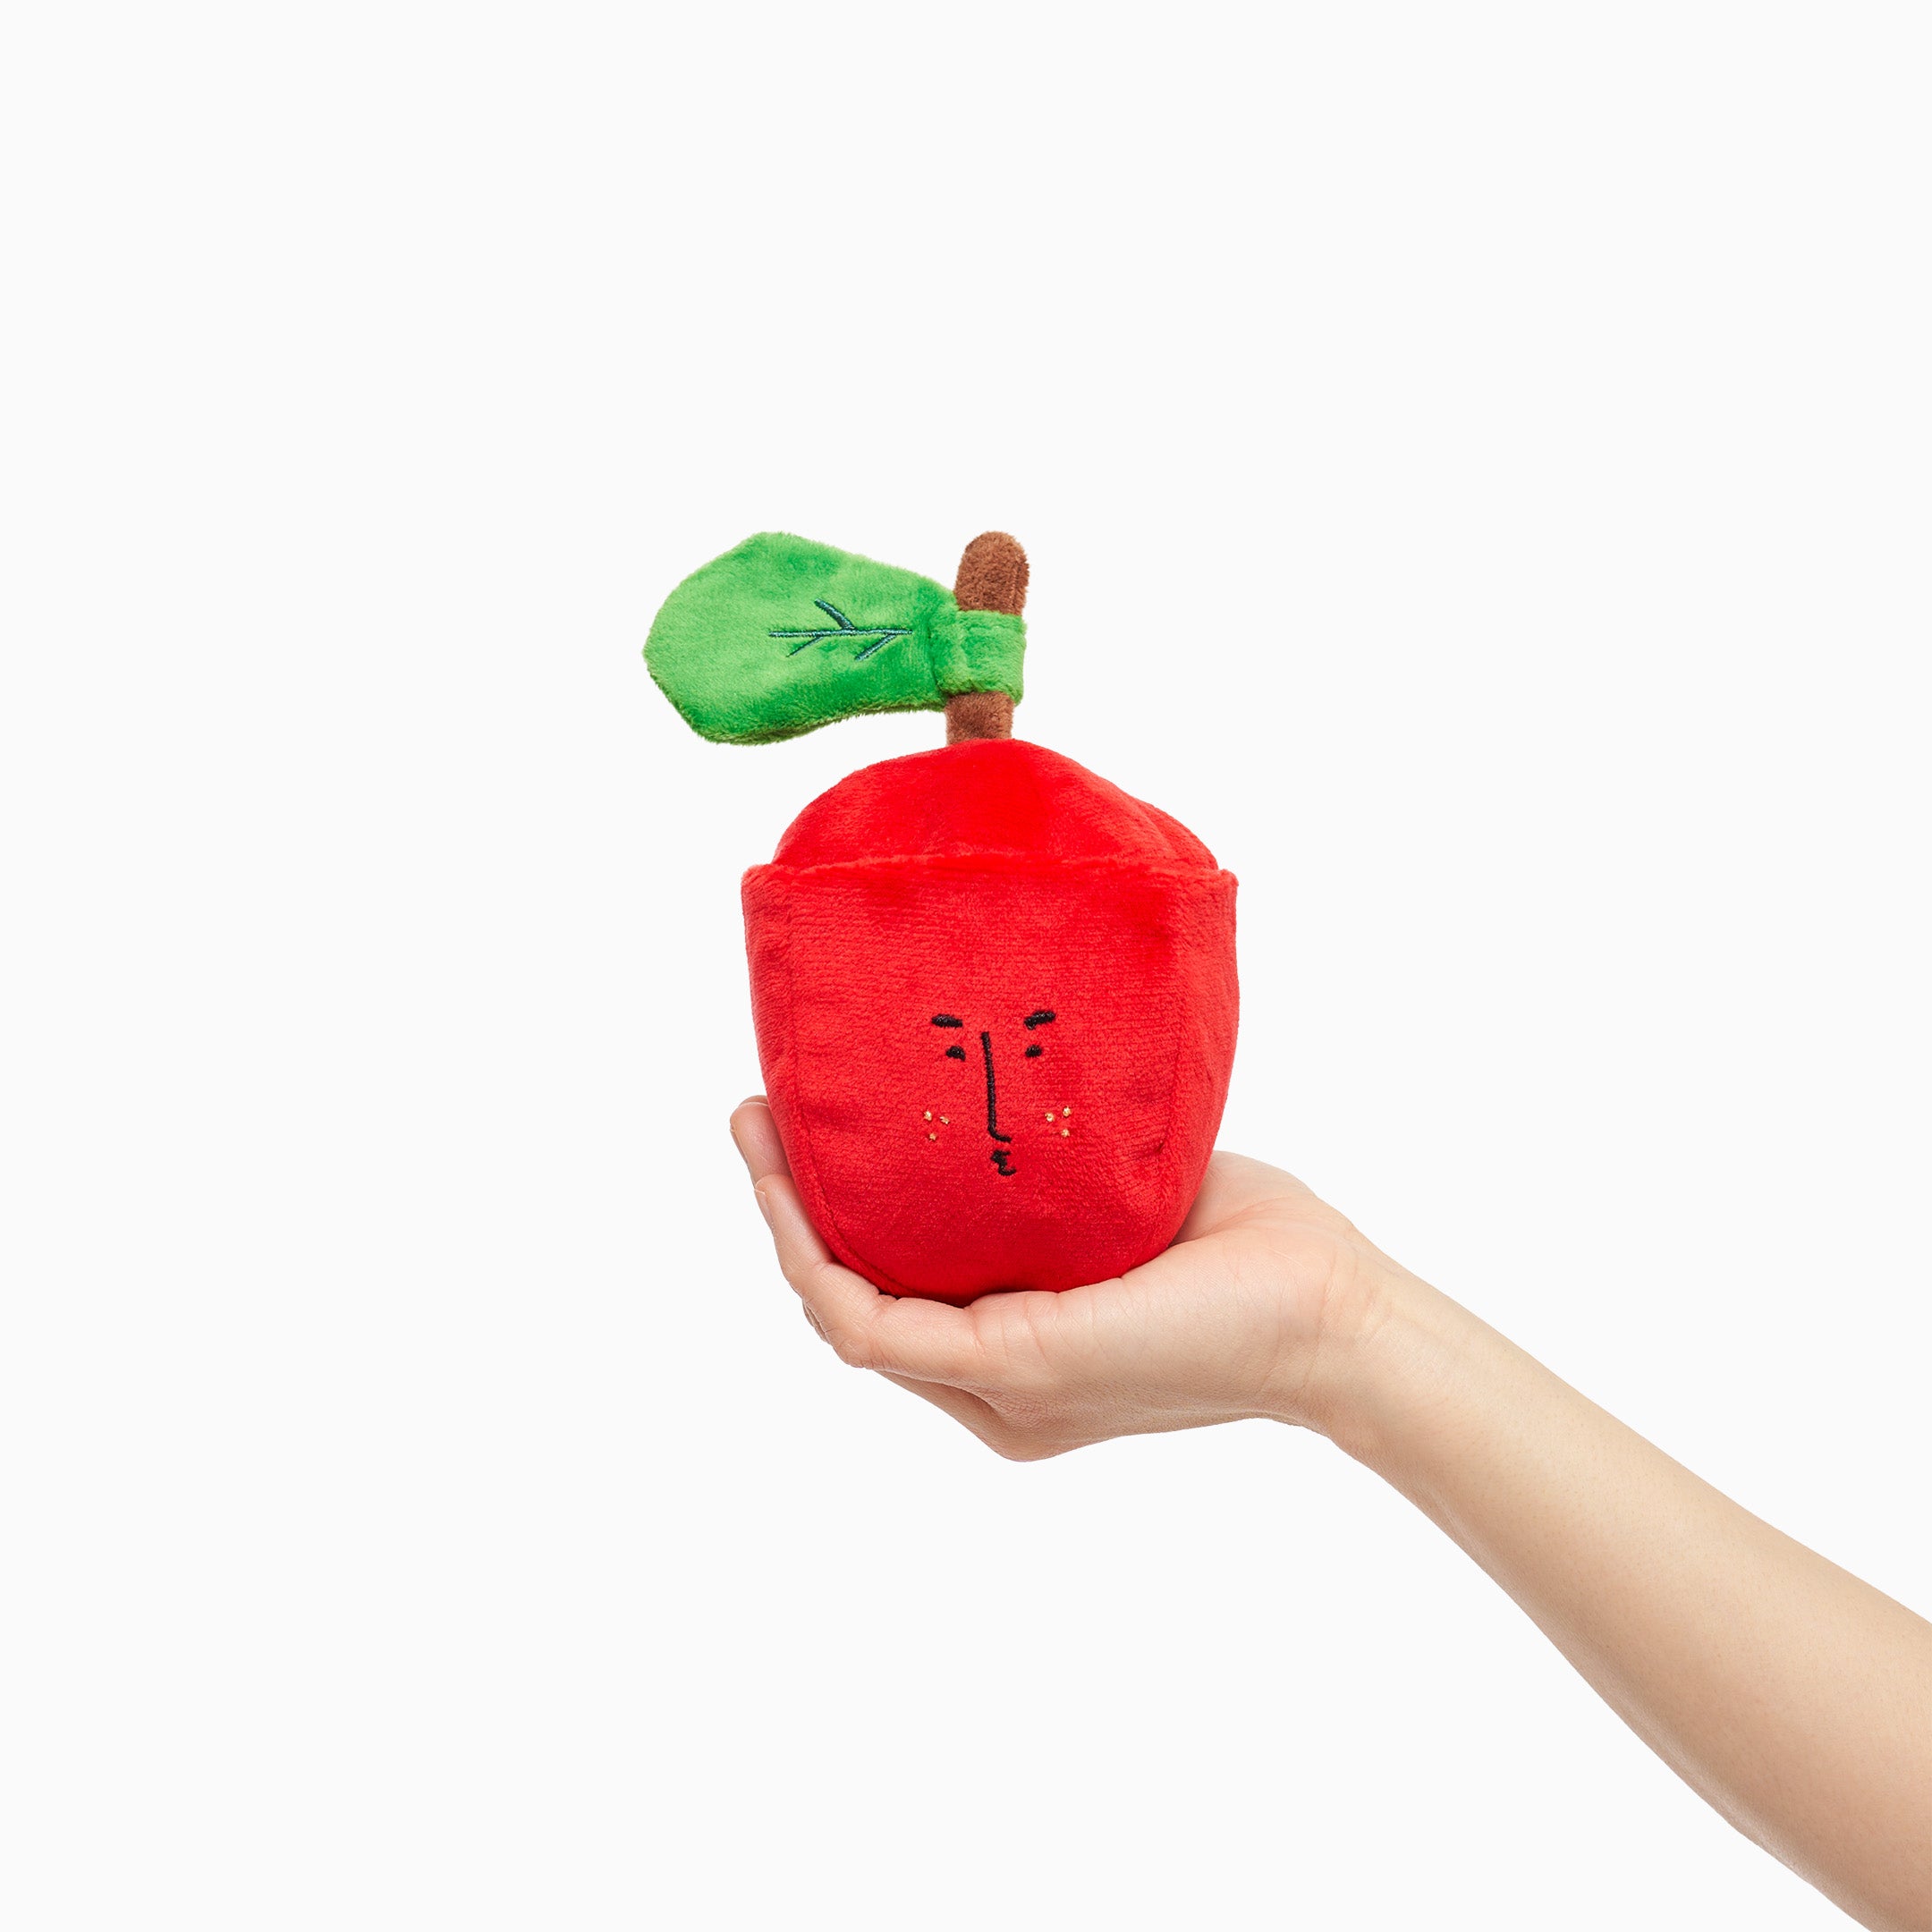 A person's hand holding a red apple-shaped dog toy with a cute face and a green leaf on white background.